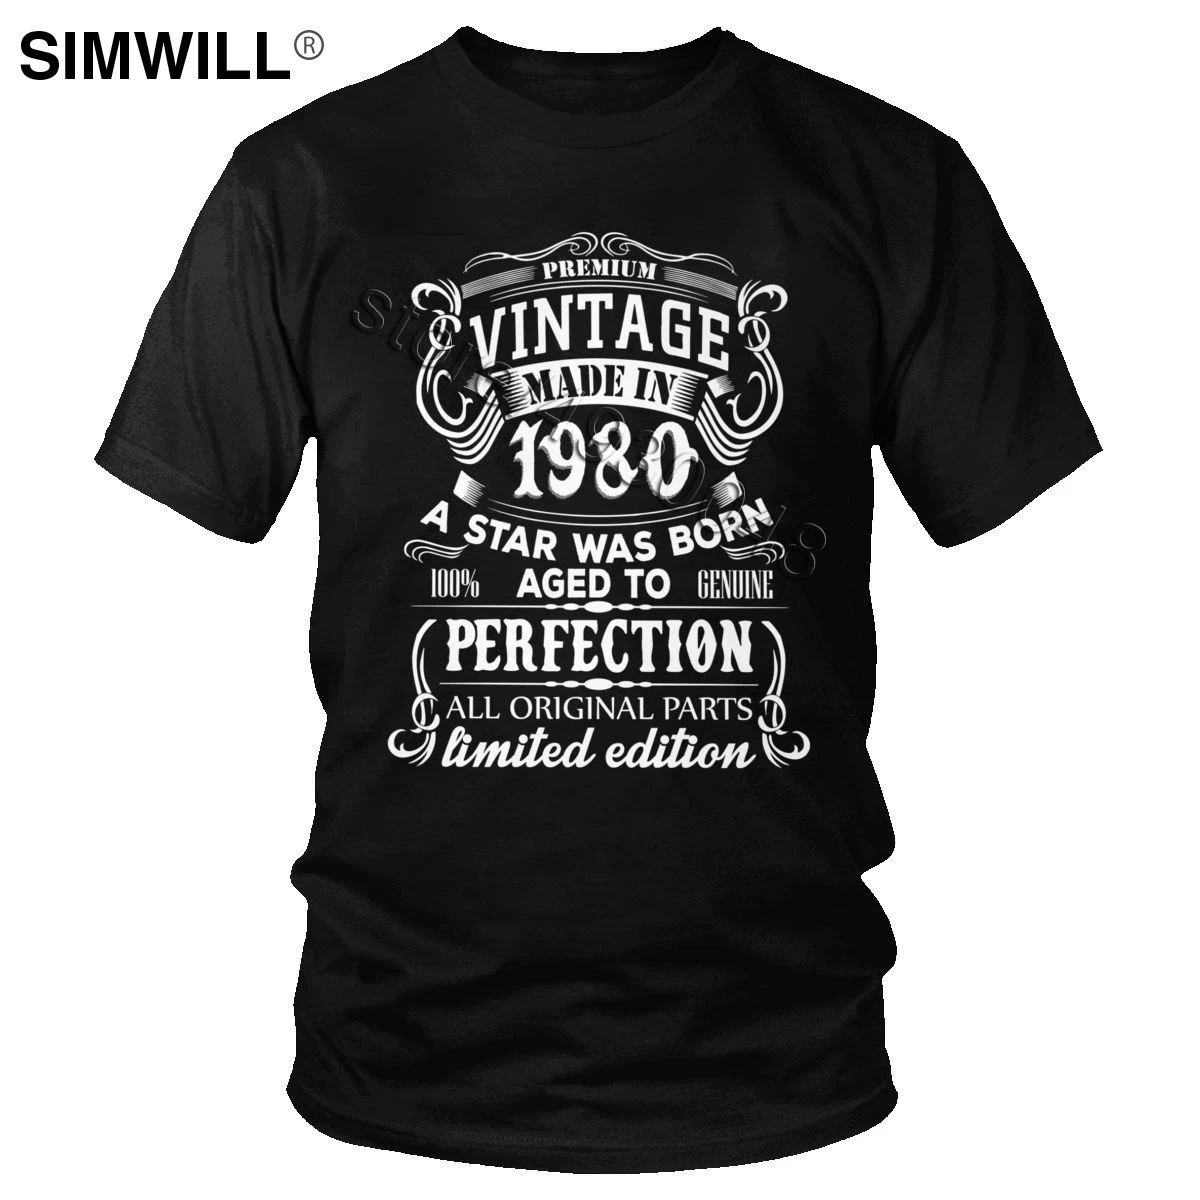 

Vintage Made In 1980 Tshirt Men Short Sleeve 40th Birthday Gift Tee 40 Years Old Tops Fashion T Shirt Cotton Anniversary T-Shirt